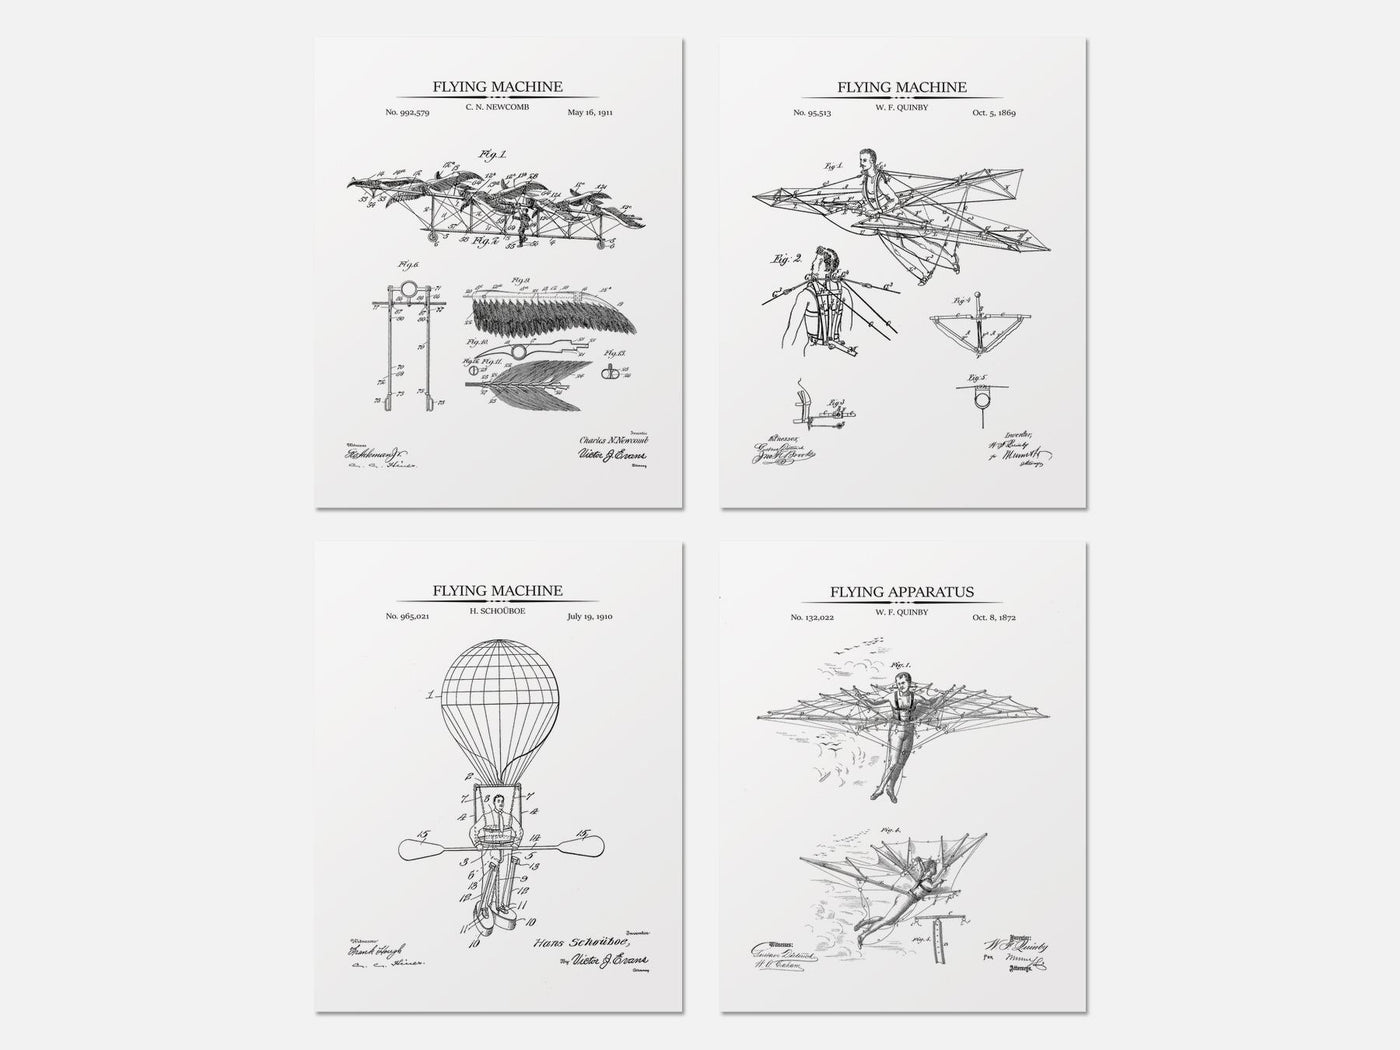 Steampunk Flying Machines Patent Print Set of 4 mockup - A_t10027-V1-PC_AP-SS_4-PS_5x7-C_whi variant